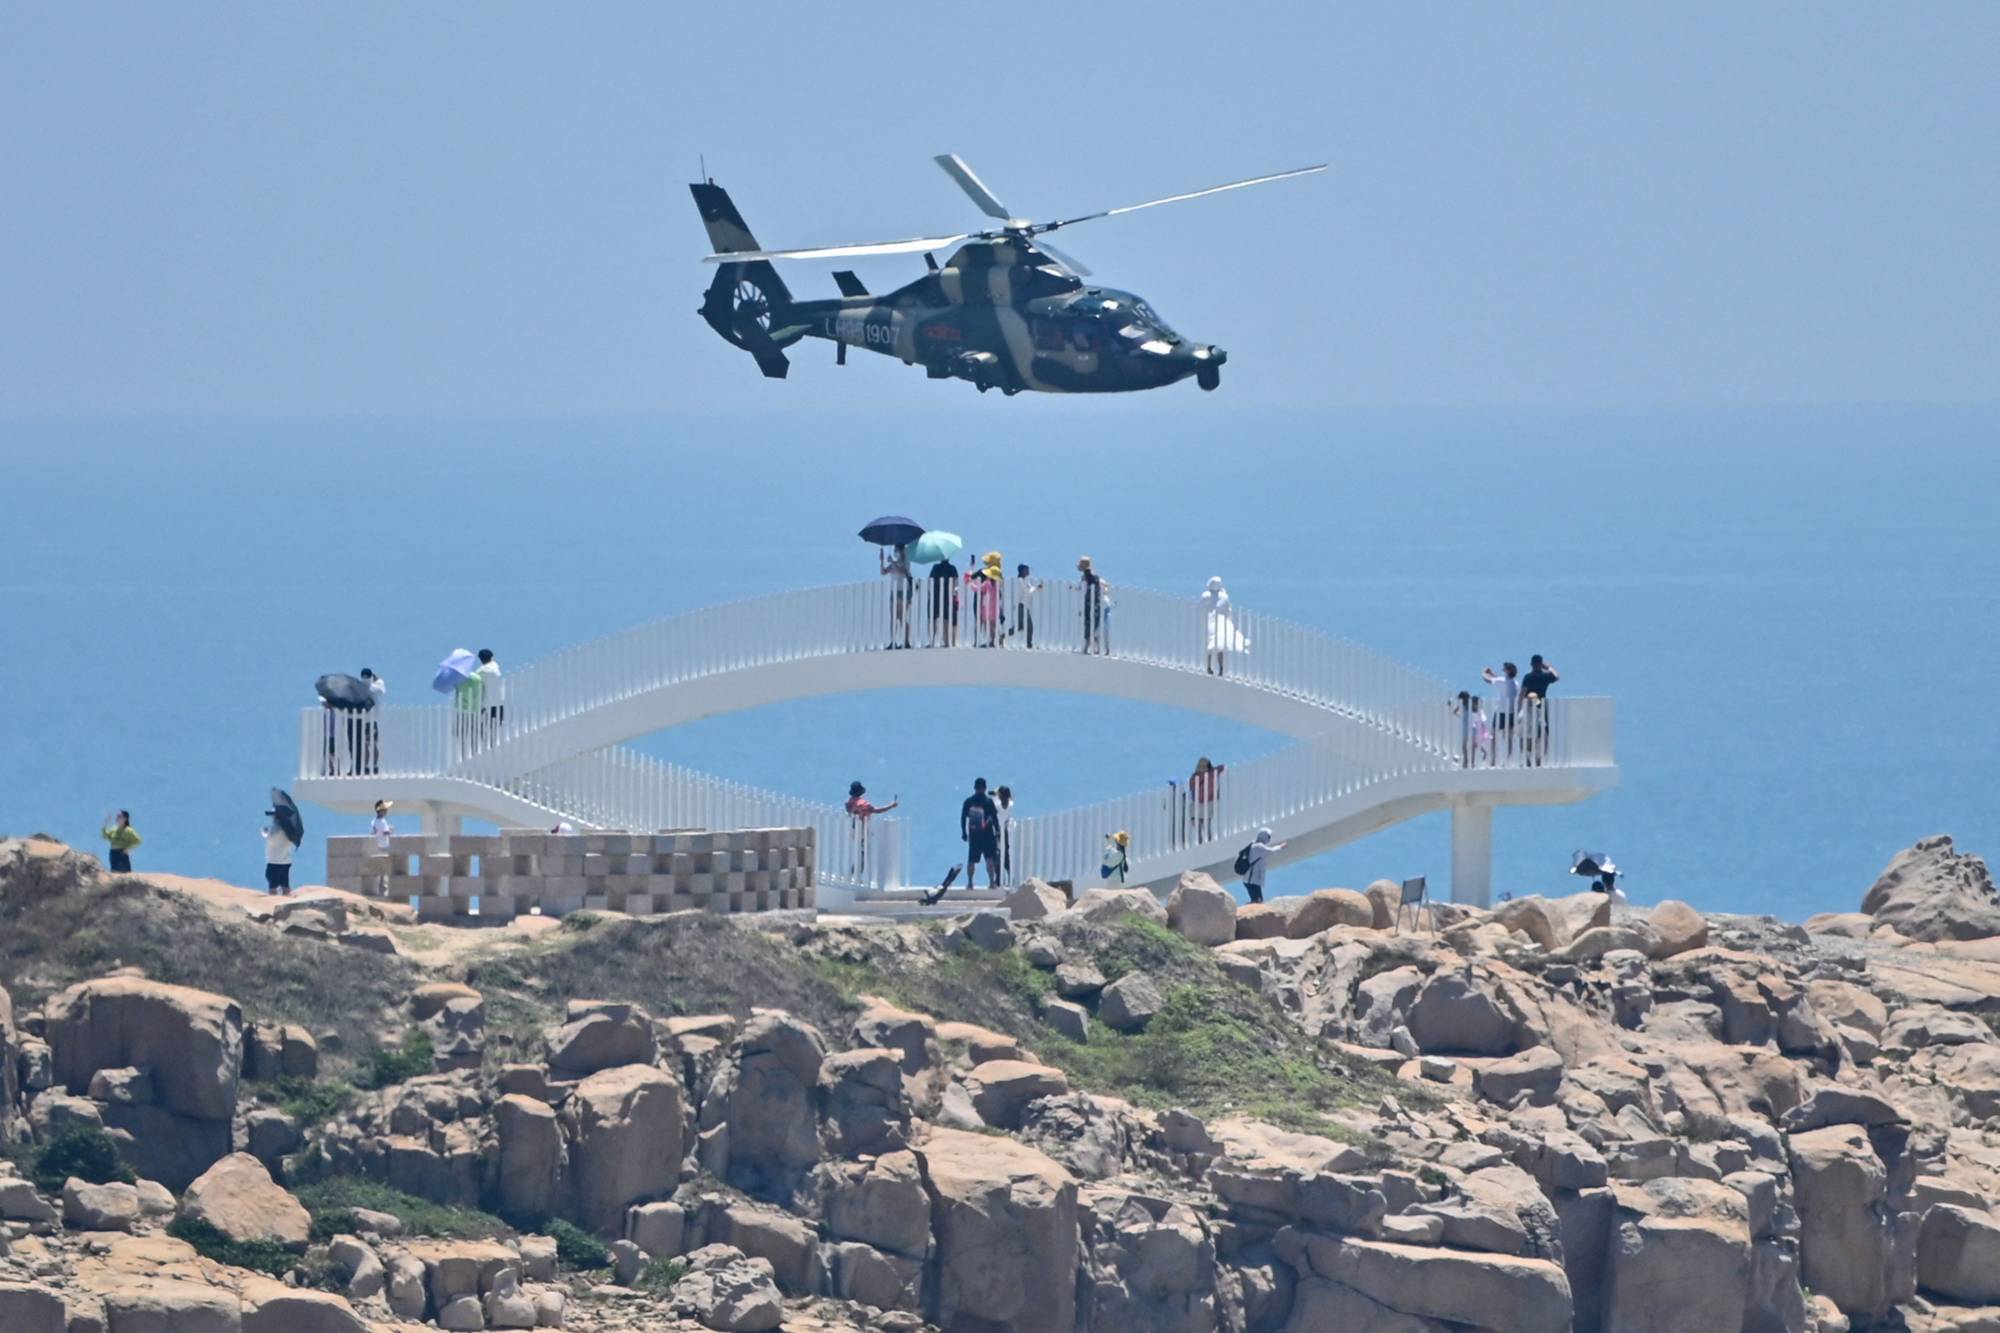 Tourists look on as a Chinese military helicopter flies past Pingtan island, one of mainland China's closest points to Taiwan, in Fujian province on Thursday, ahead of massive military drills off Taiwan. | AFP-JIJI